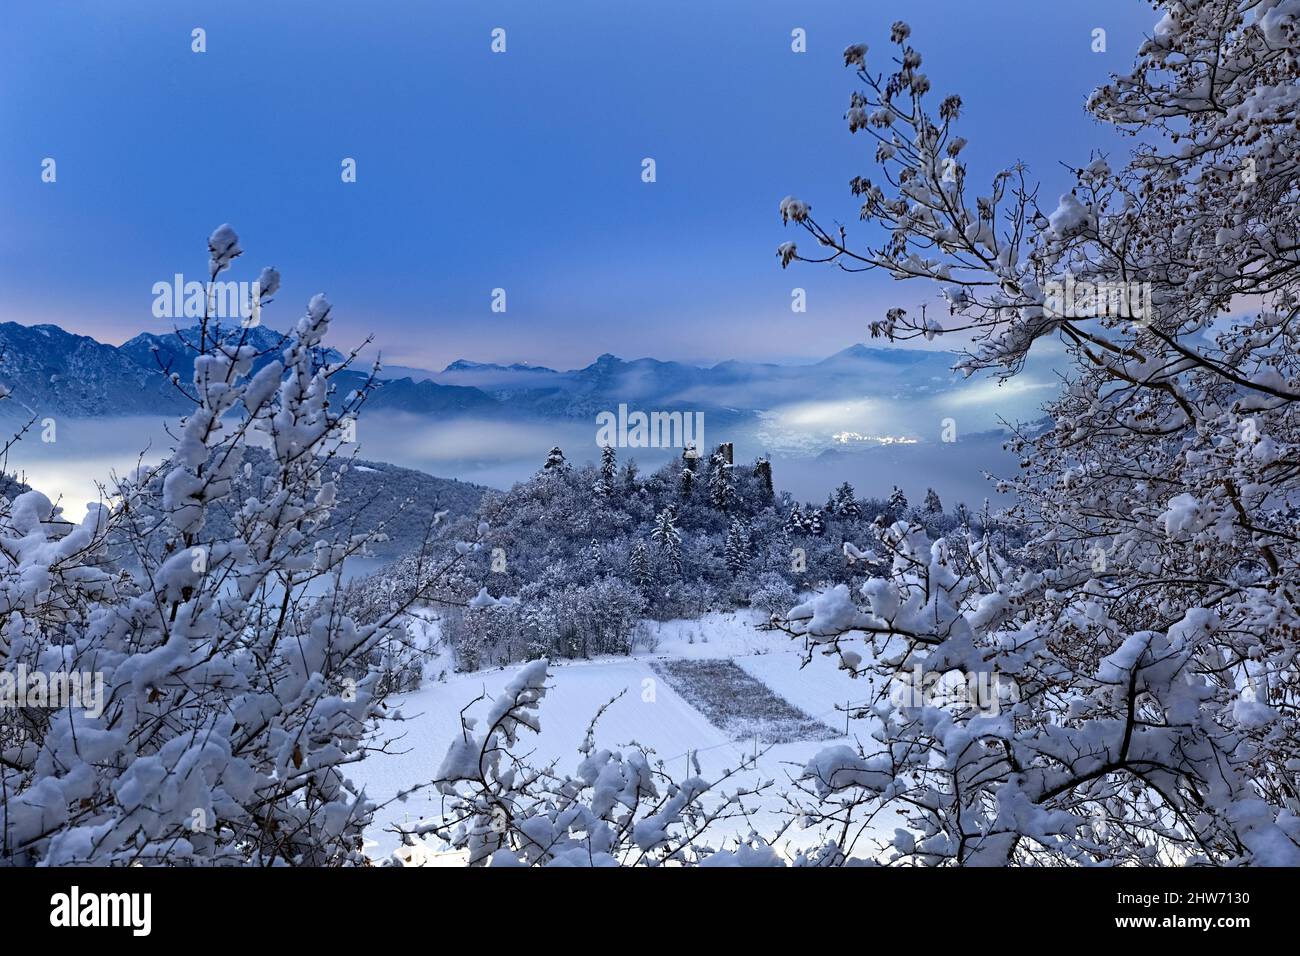 The Gresta Valley on a full moon winter night: in the center the hill where the medieval ruins of Gresta Castle stand. Pannone, Trentino, Italy. Stock Photo